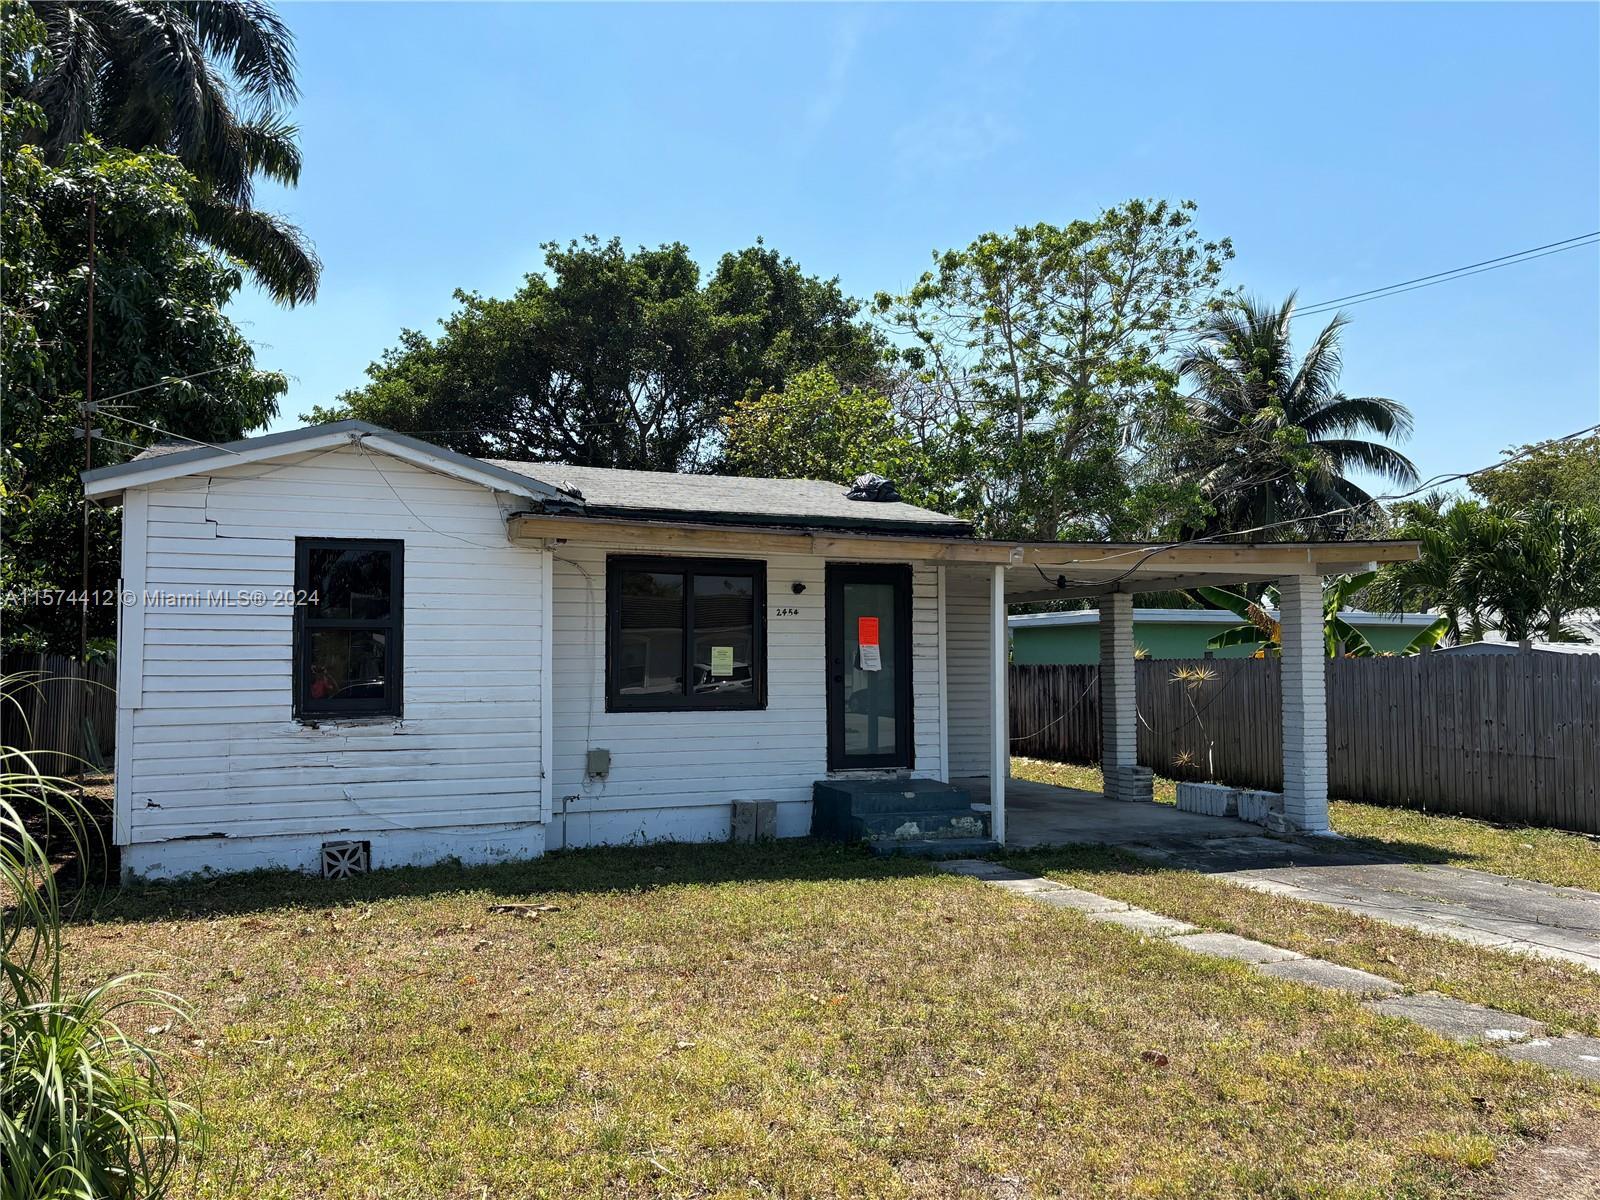 Photo of 2454 Garfield St in Hollywood, FL